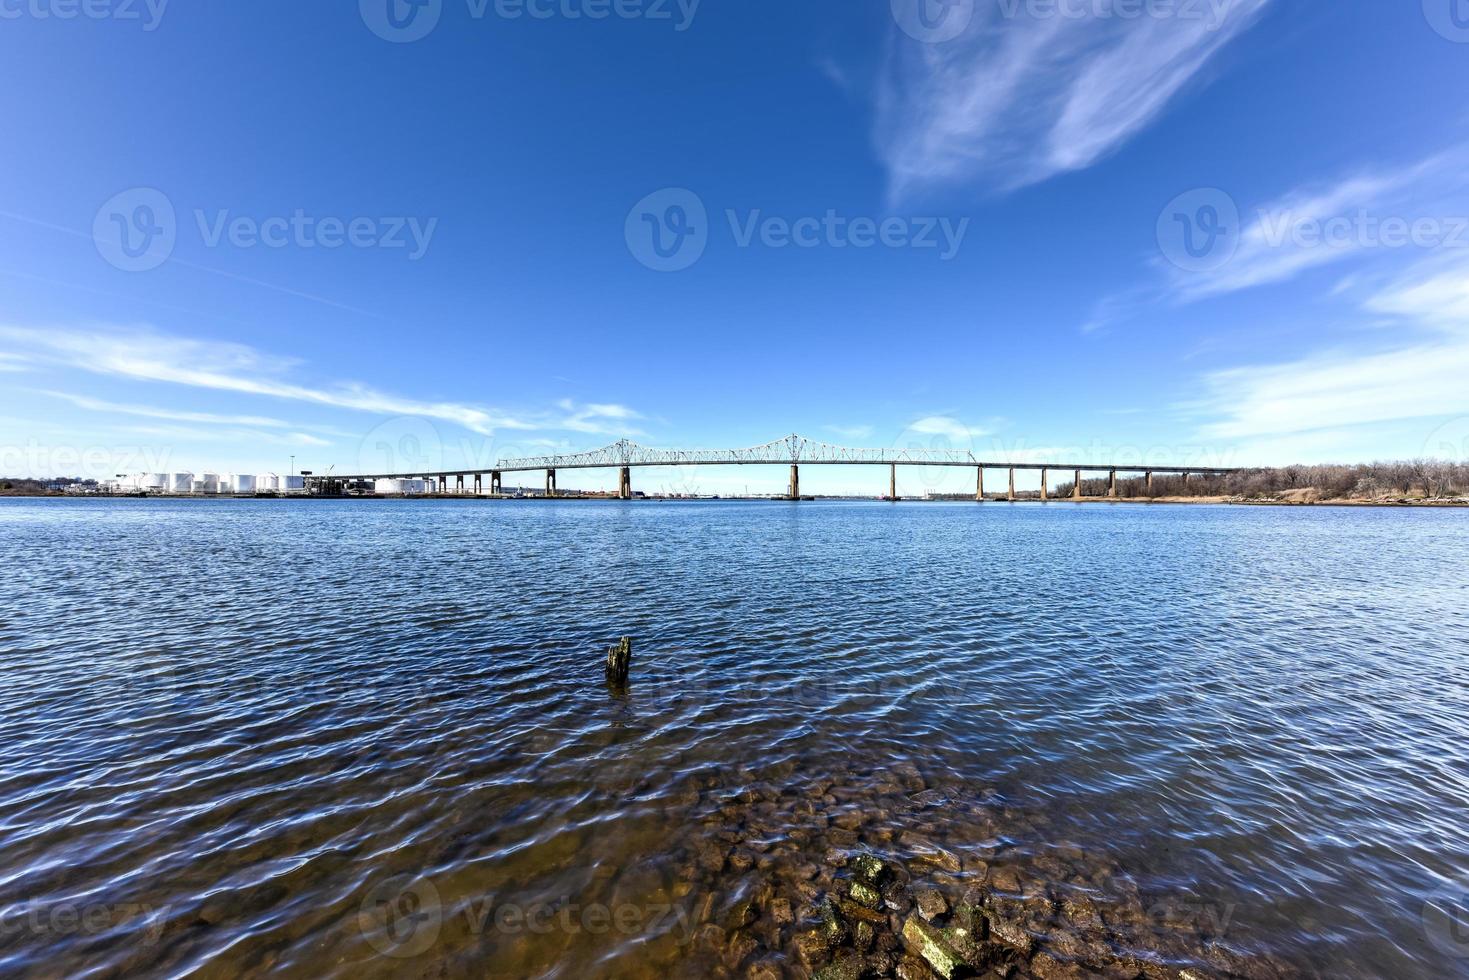 The Outerbridge Crossing is a cantilever bridge which spans the Arthur Kill. The Outerbridge, as it is often known, connects Perth Amboy, New Jersey, with Staten Island, New York. photo